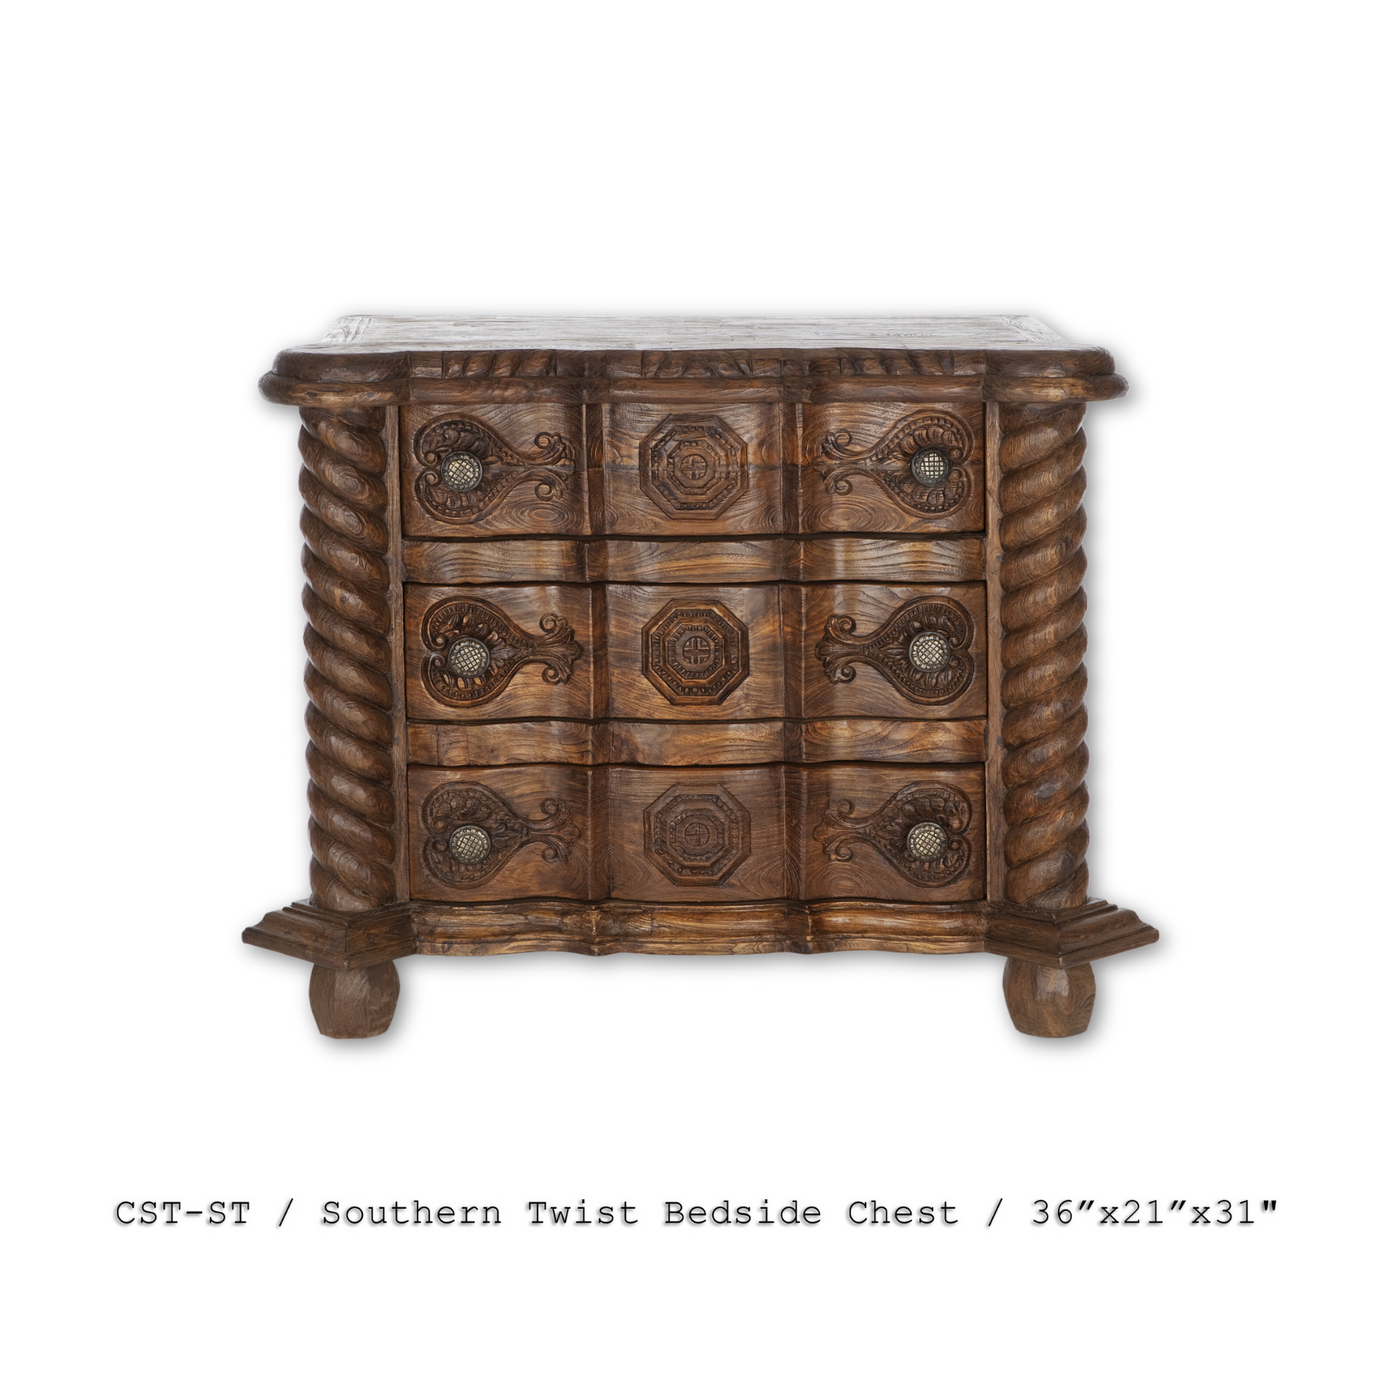 Southern Twist Bedside Chest